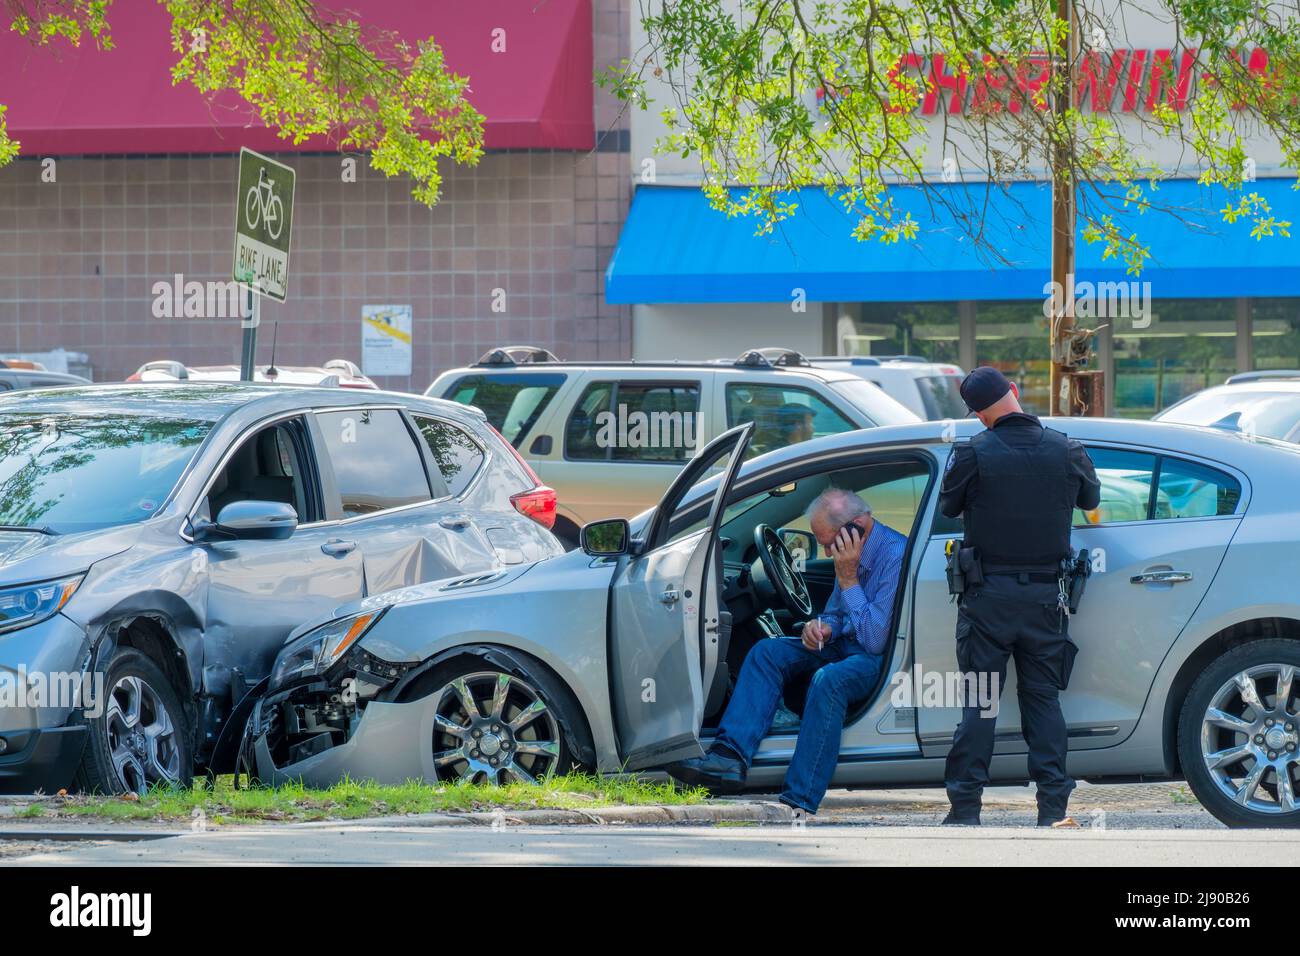 NEW ORLEANS, LA, USA - MAY 9, 2022: Car accident scene with damaged cars, policeman writing traffic ticket and driver (on cell phone) Stock Photo